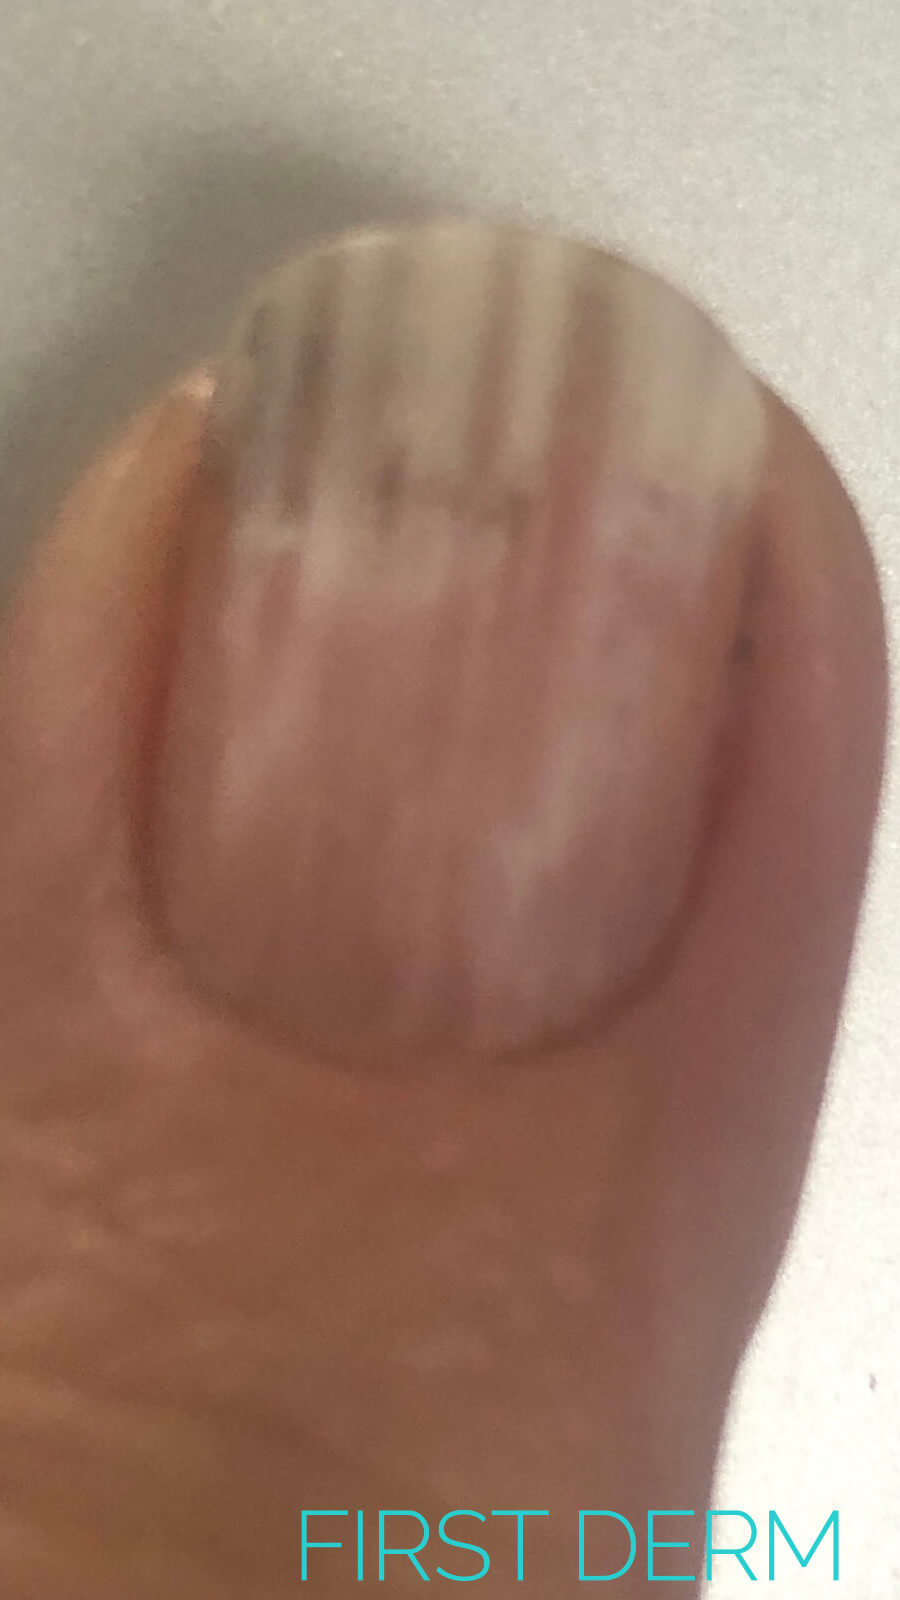 11 Tips For Getting Rid Of Unsightly Fingernail Ridges